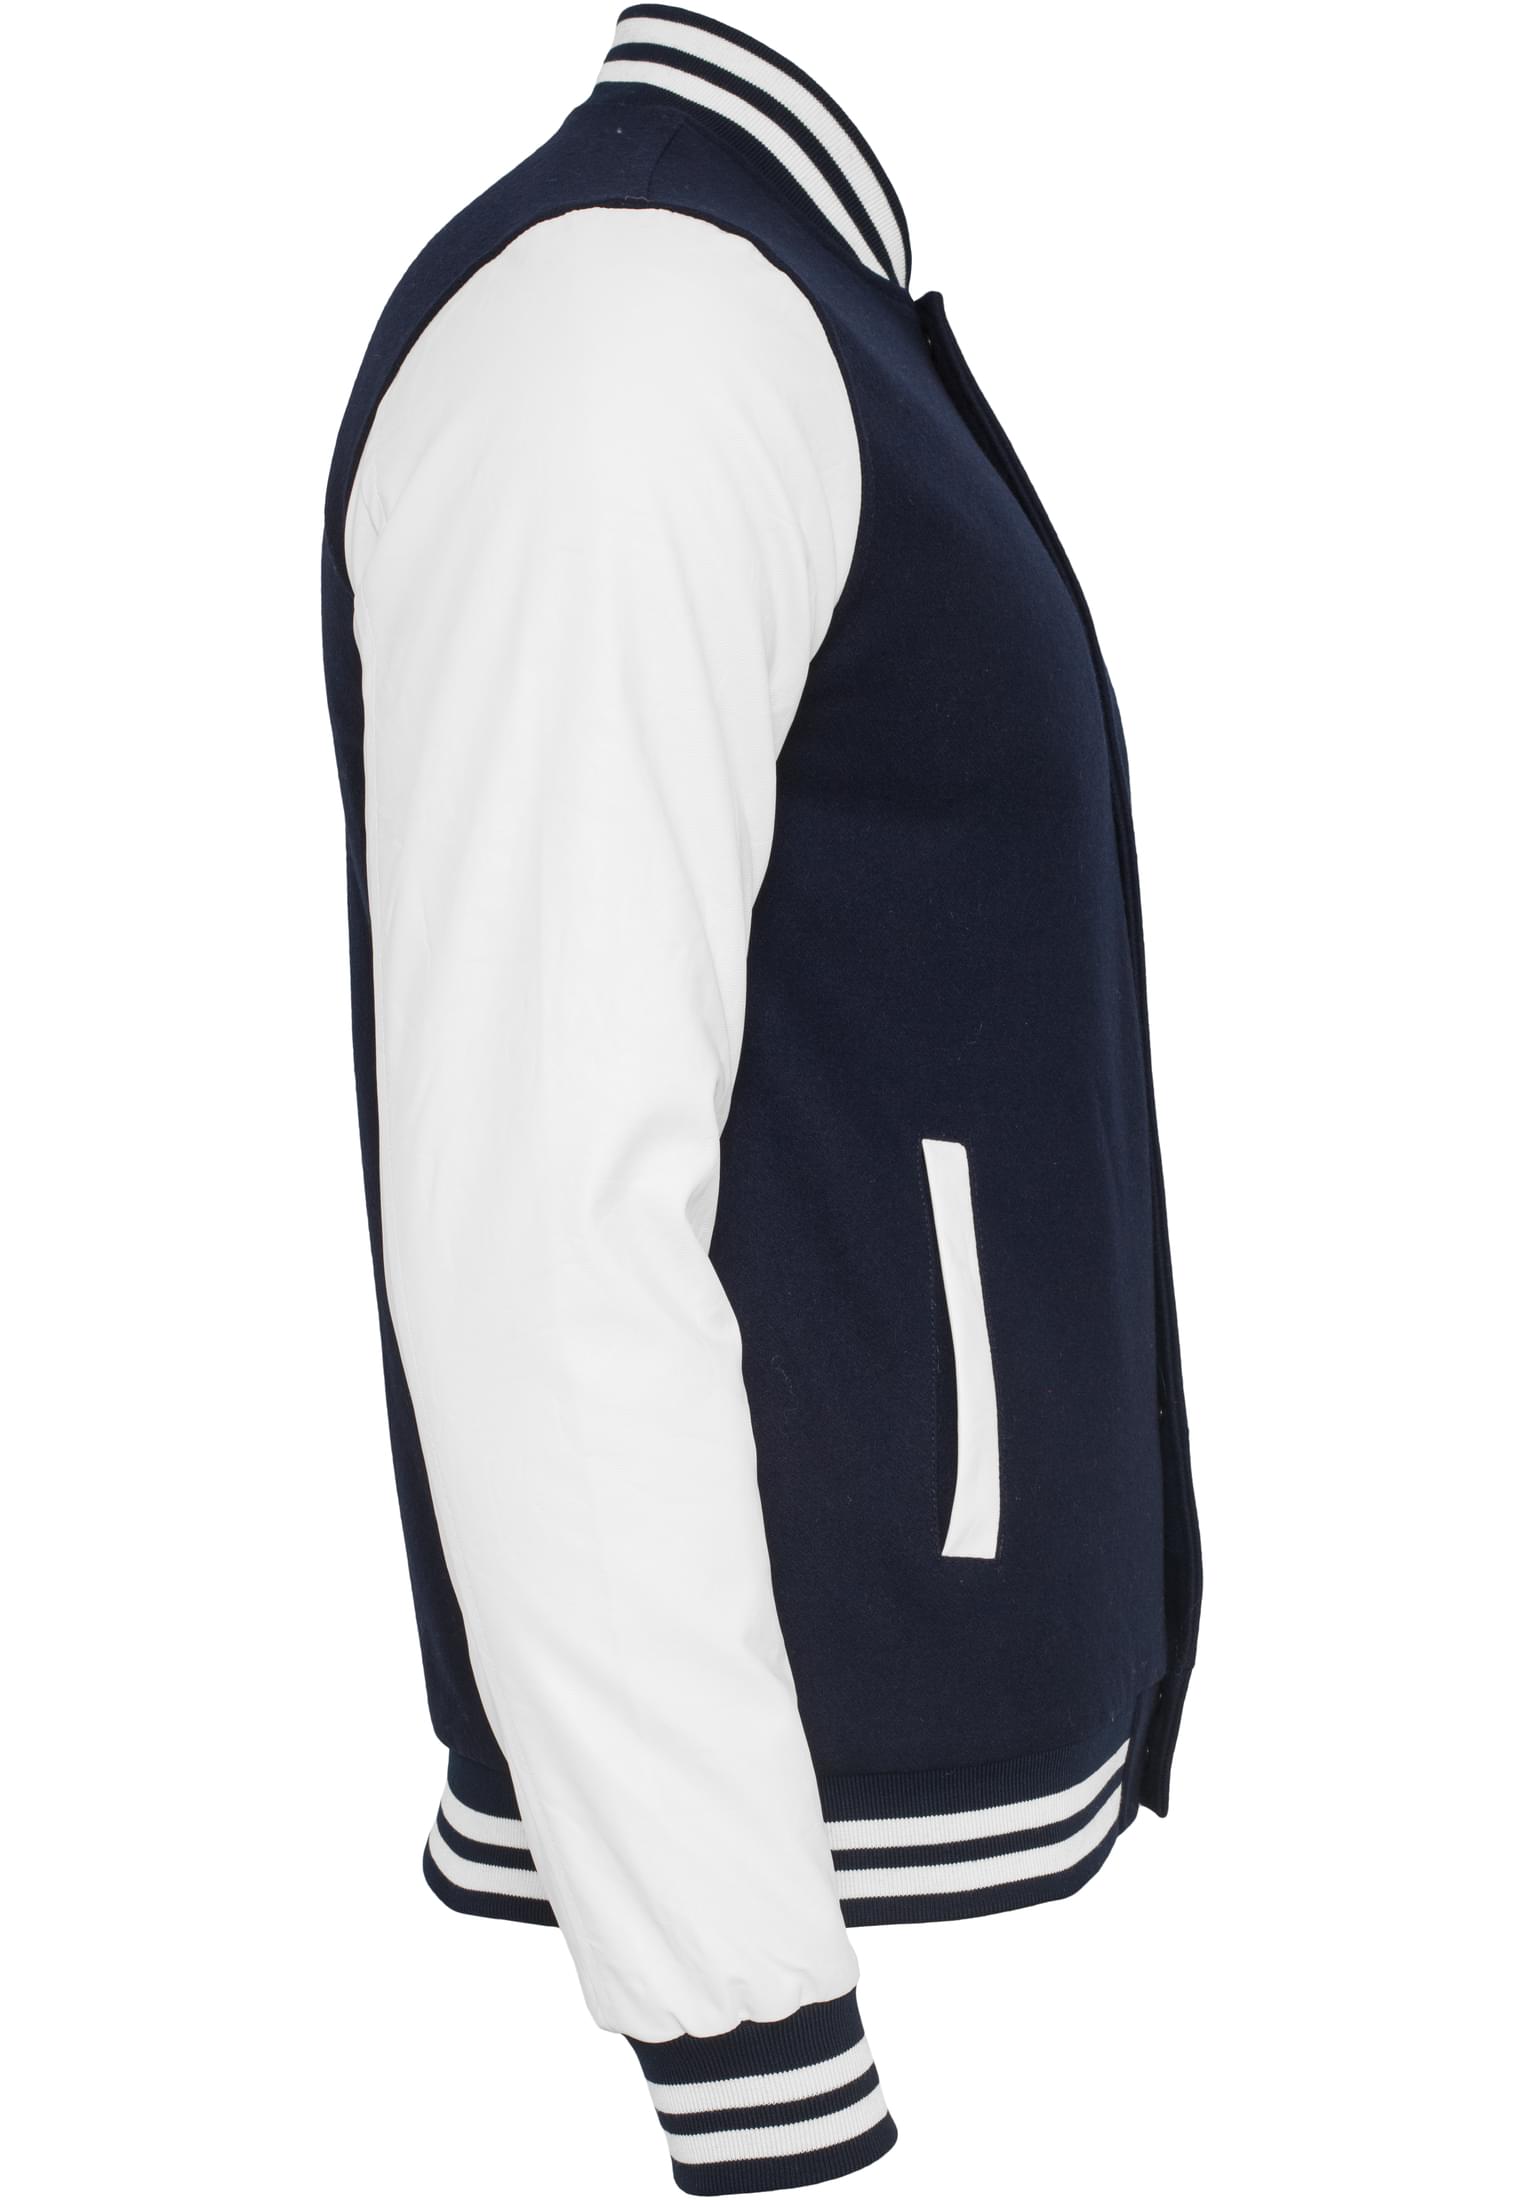 College Jacken Oldschool College Jacket in Farbe nvy/wht